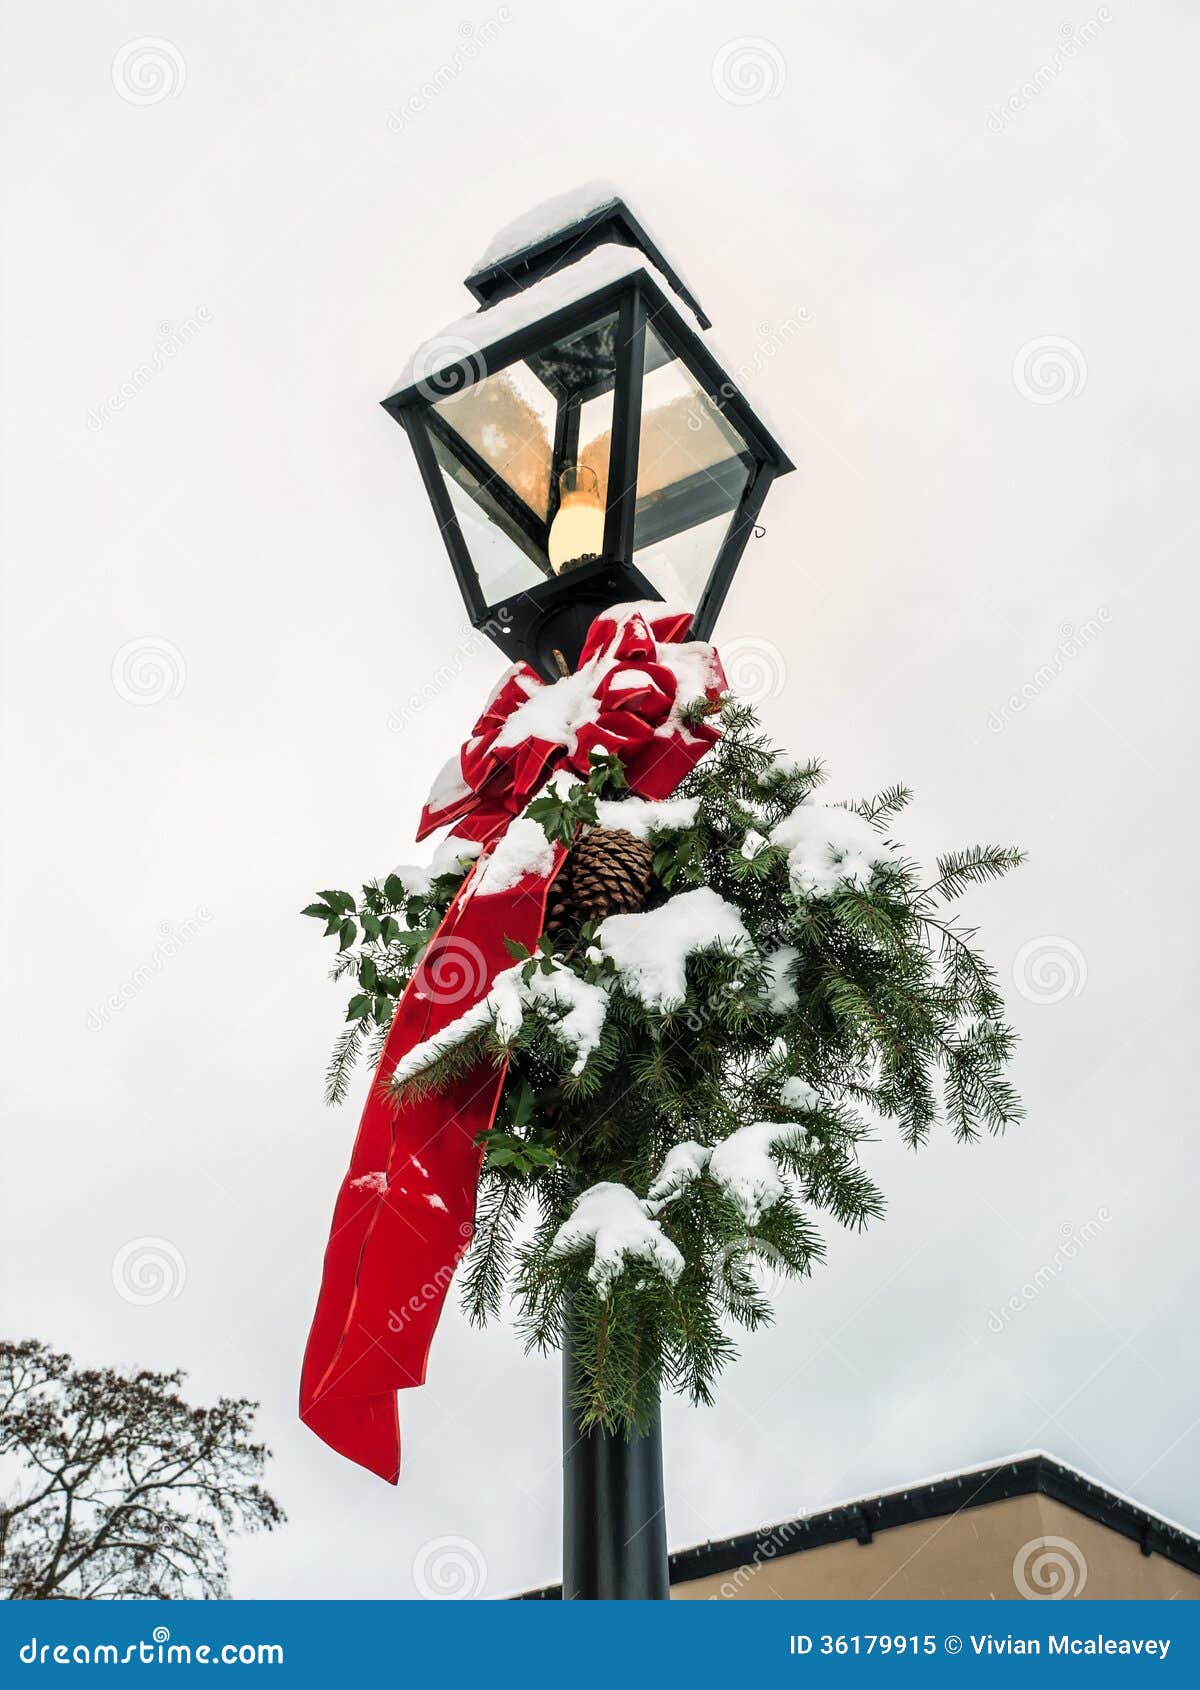 Lamp Post With Christmas Decoration Royalty Free Stock Photo - Image ...